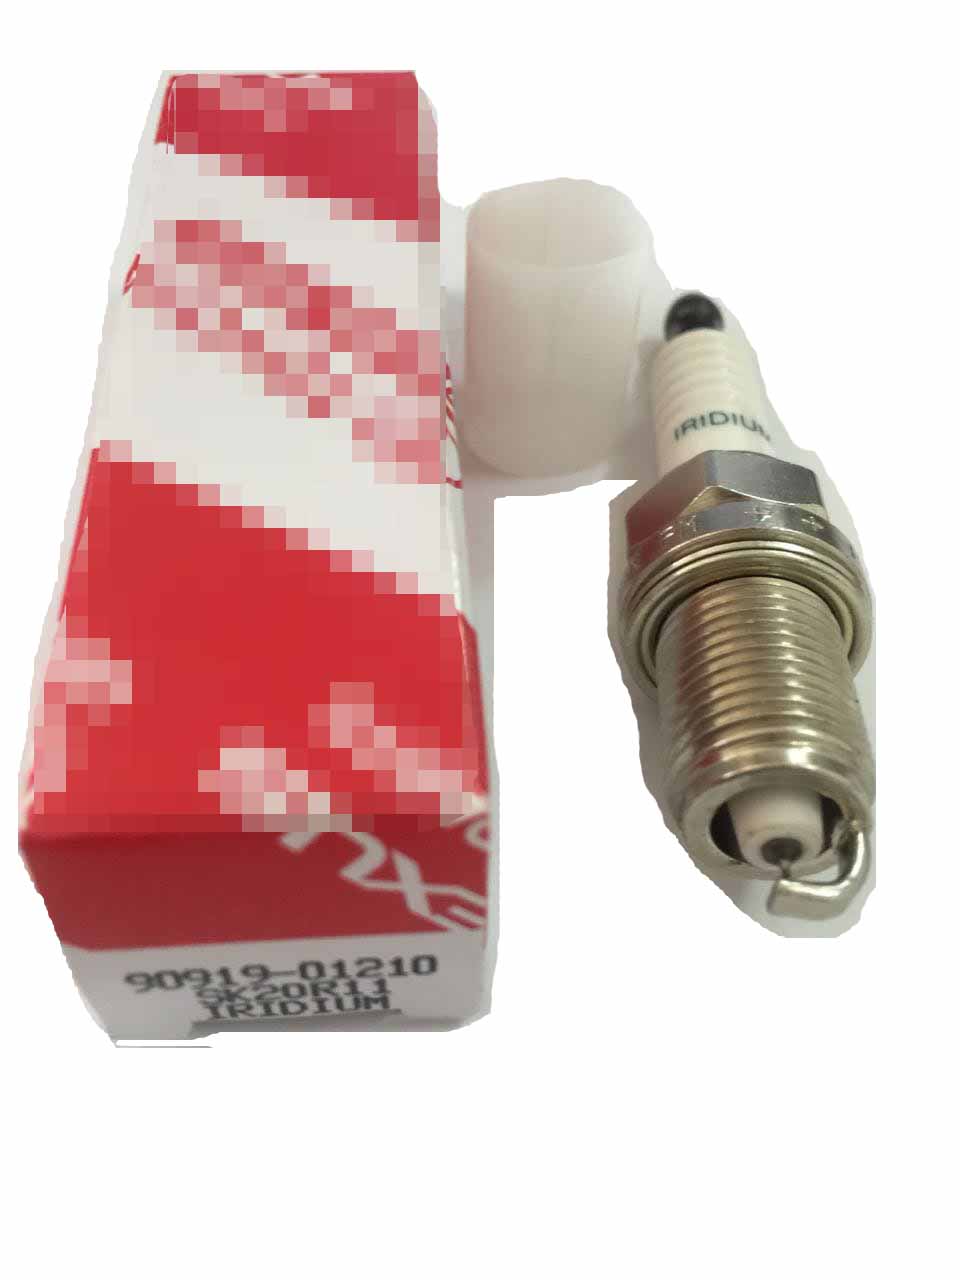 toyota spark plug new packing 9091901210 9091901253 9091901247